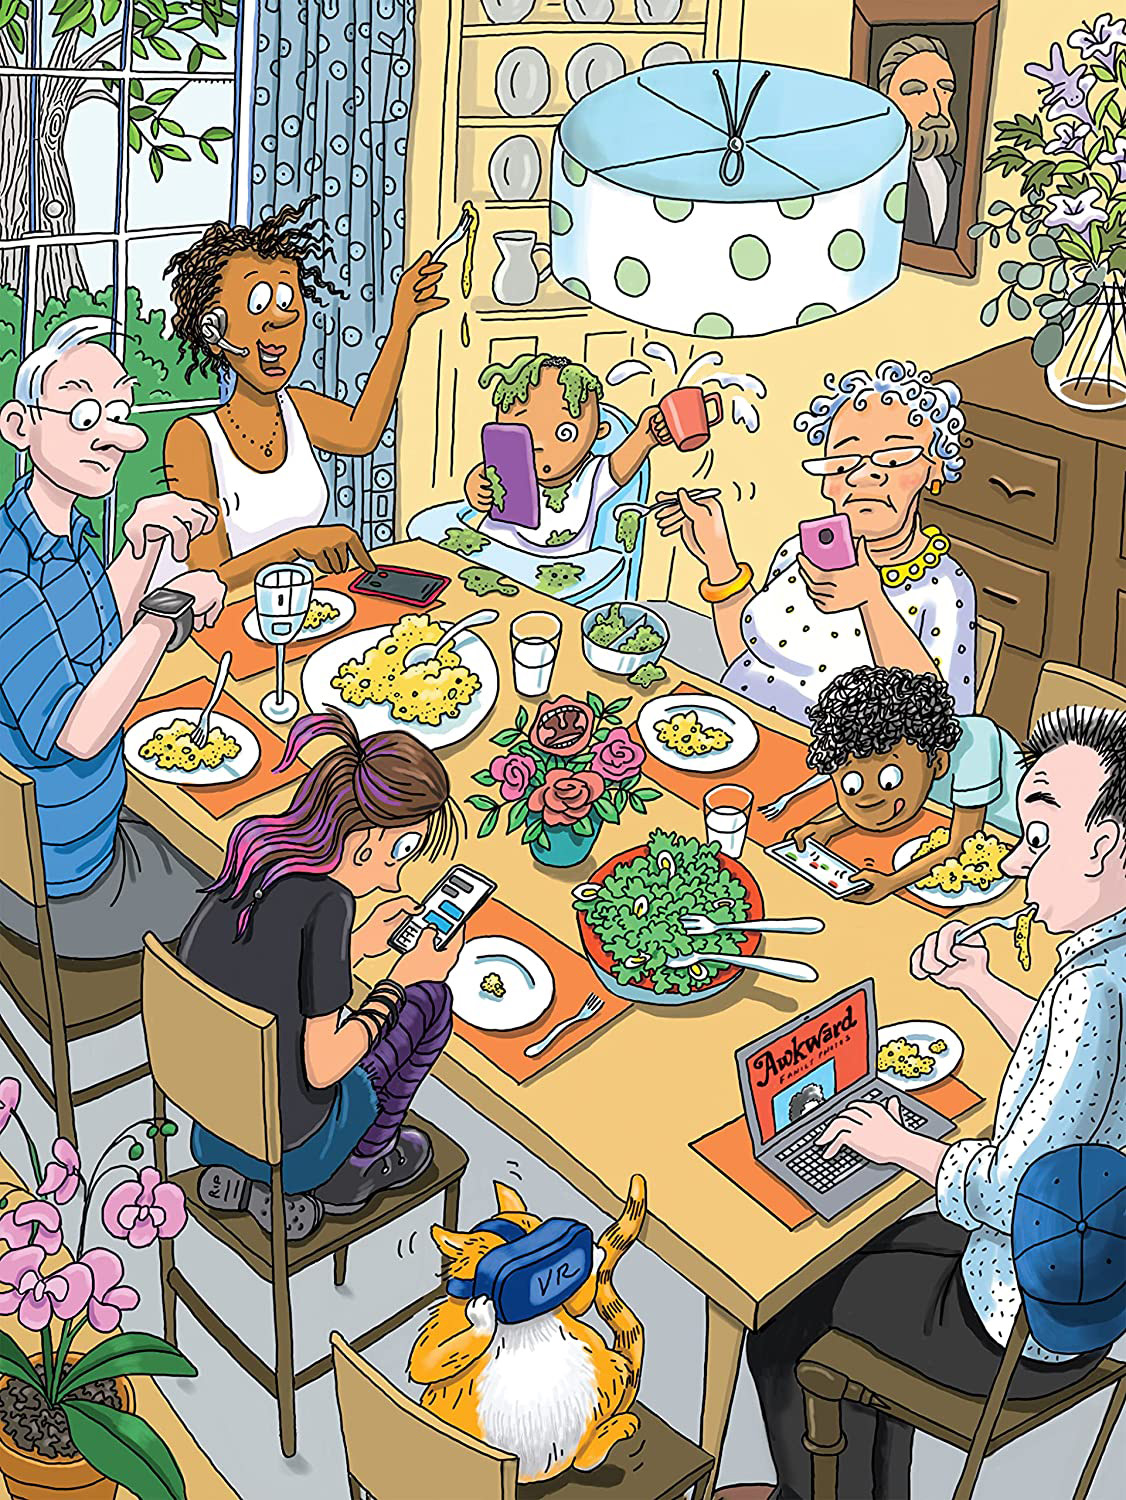 Search and Funny - Family Dinner Jigsaw Puzzle